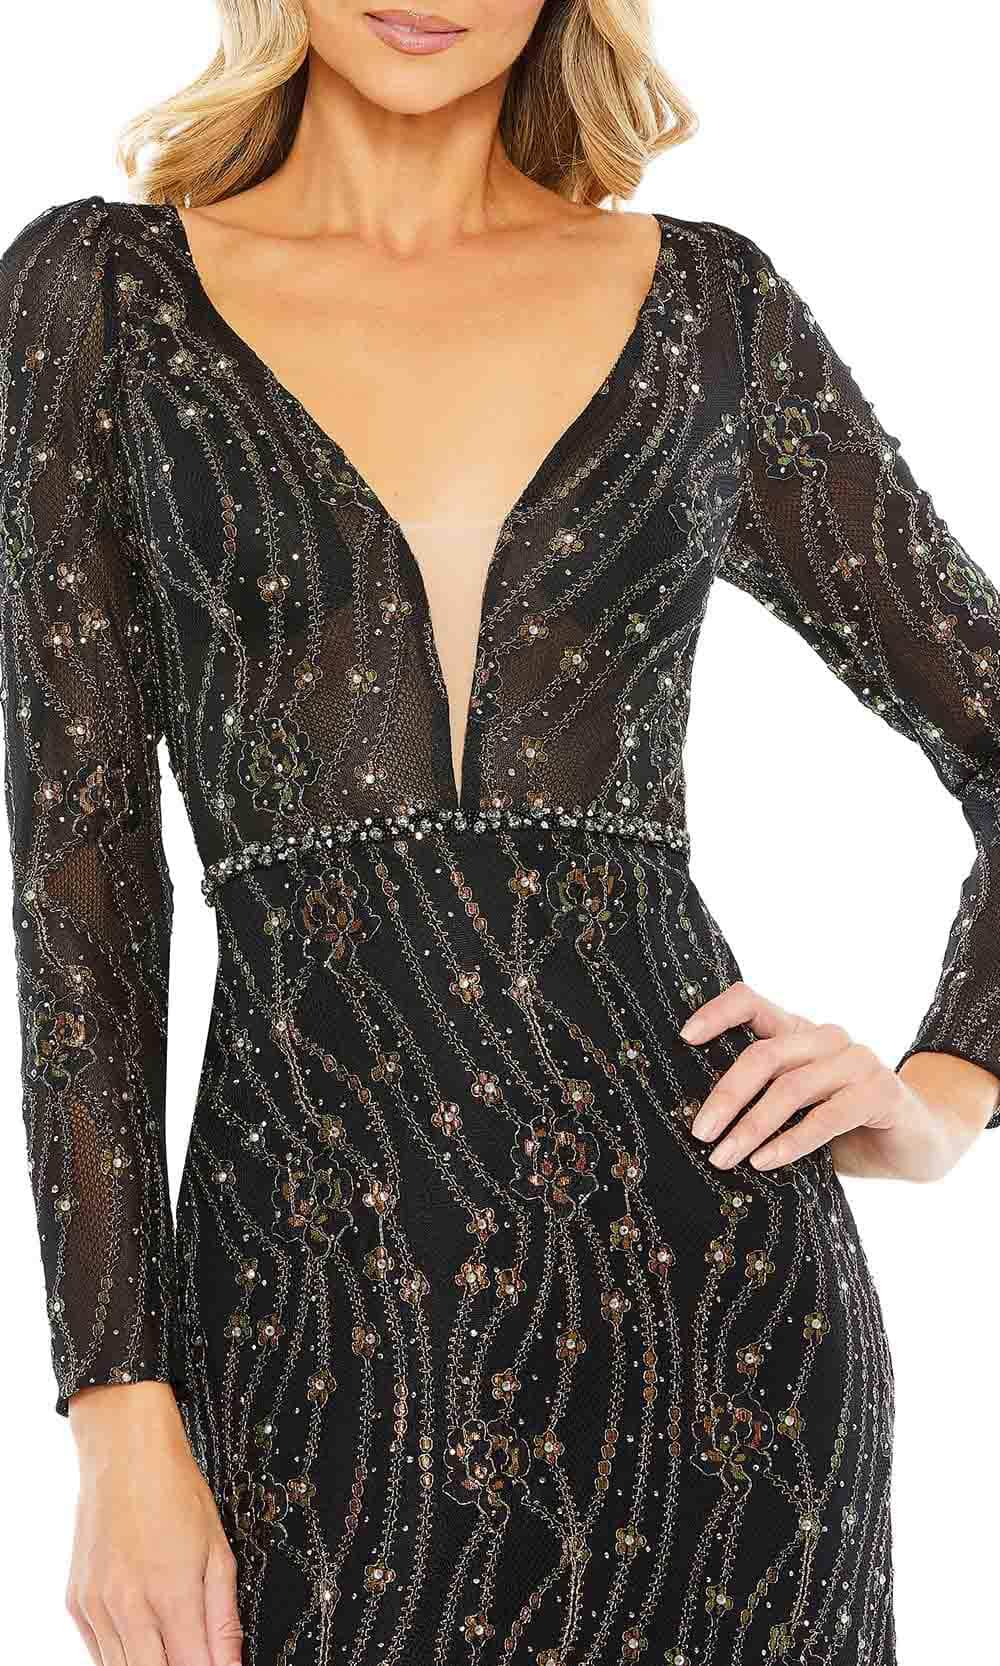 Mac Duggal 11159 - Plunging Embellished Evening Gown Special Occasion Dress